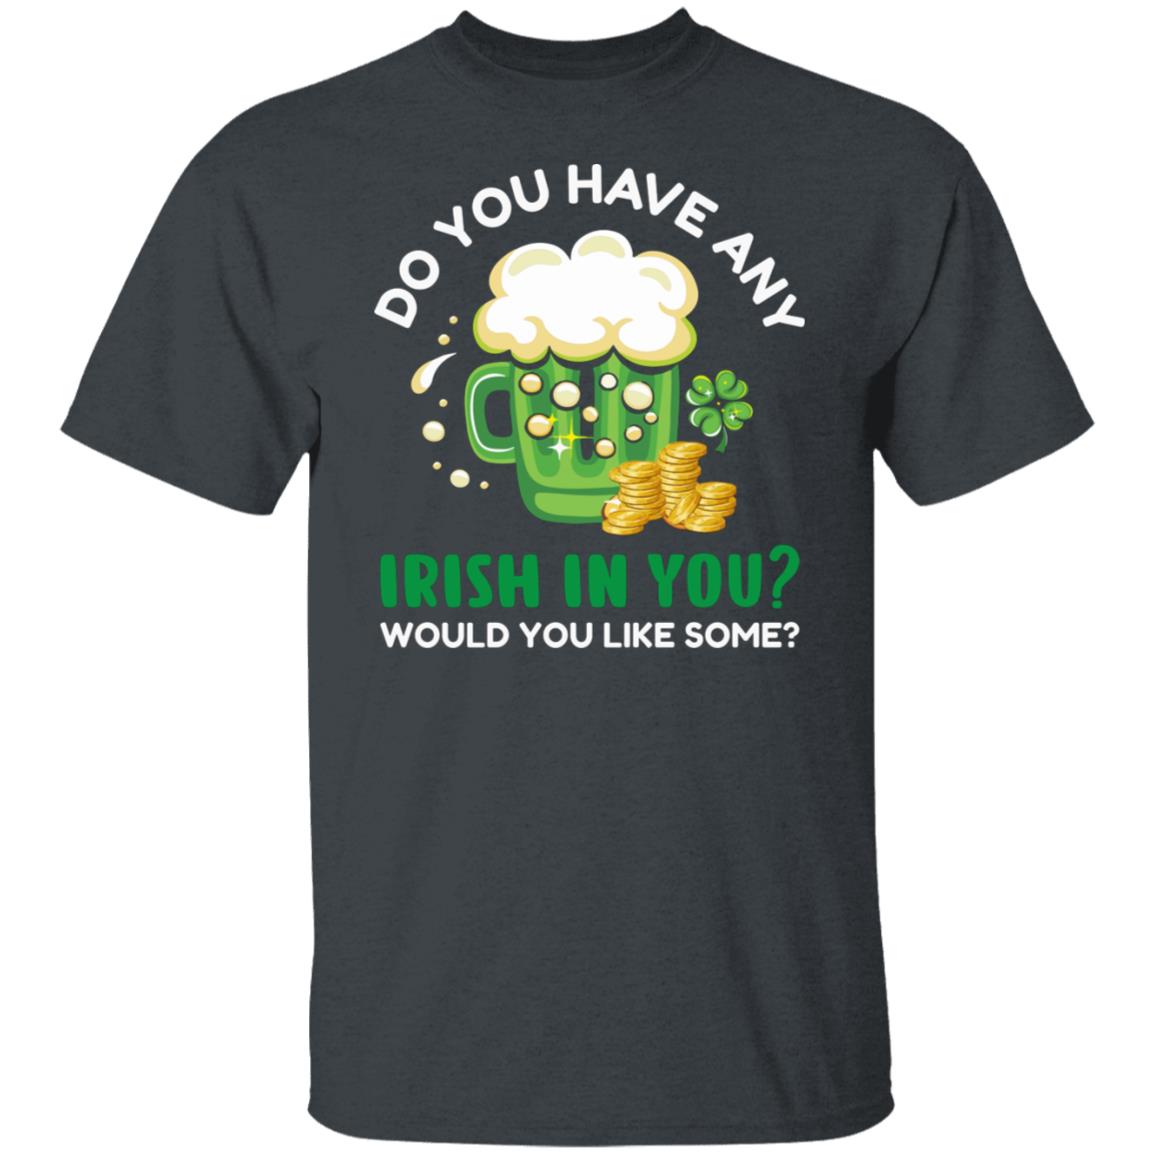 Do You Have Any Irish in You Funny St Patricks Day Drinking Shirt